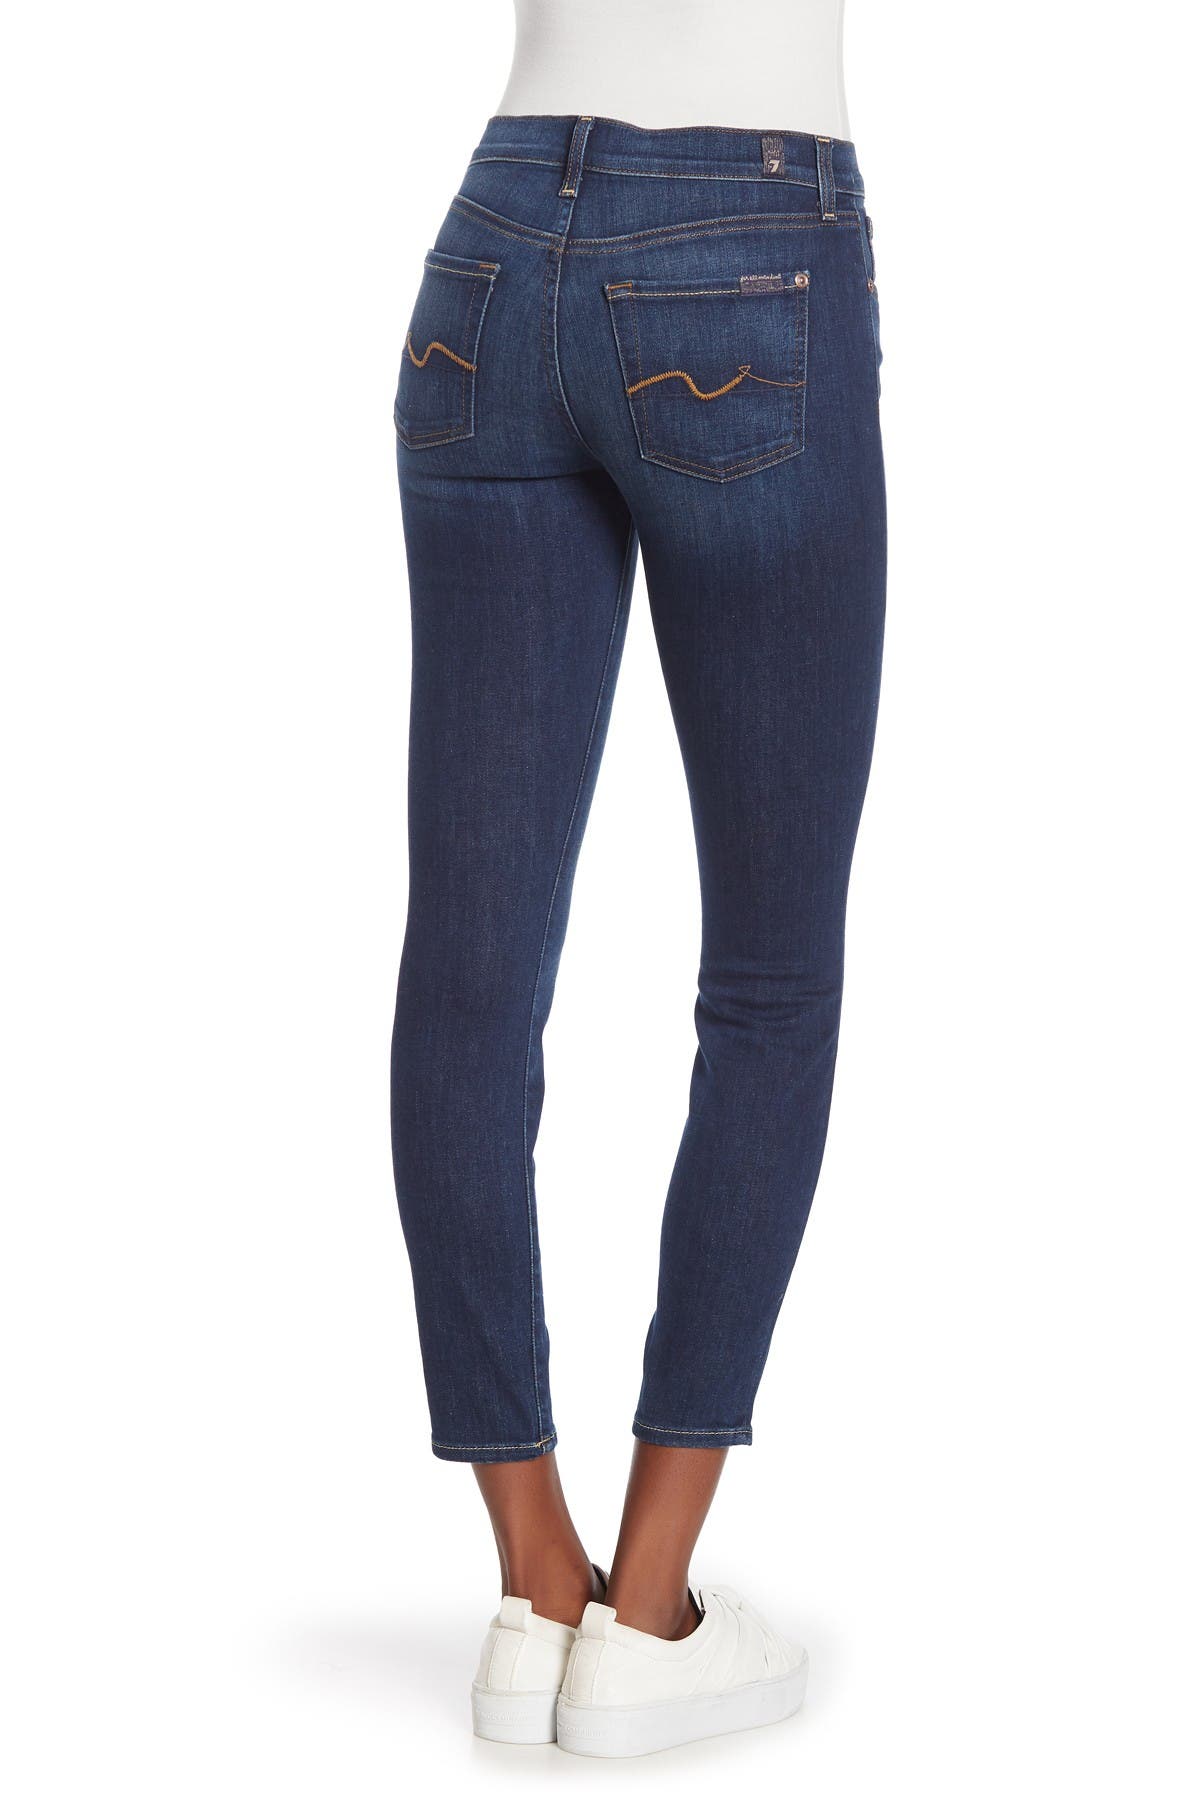 7 for all mankind jeans nordstrom rack